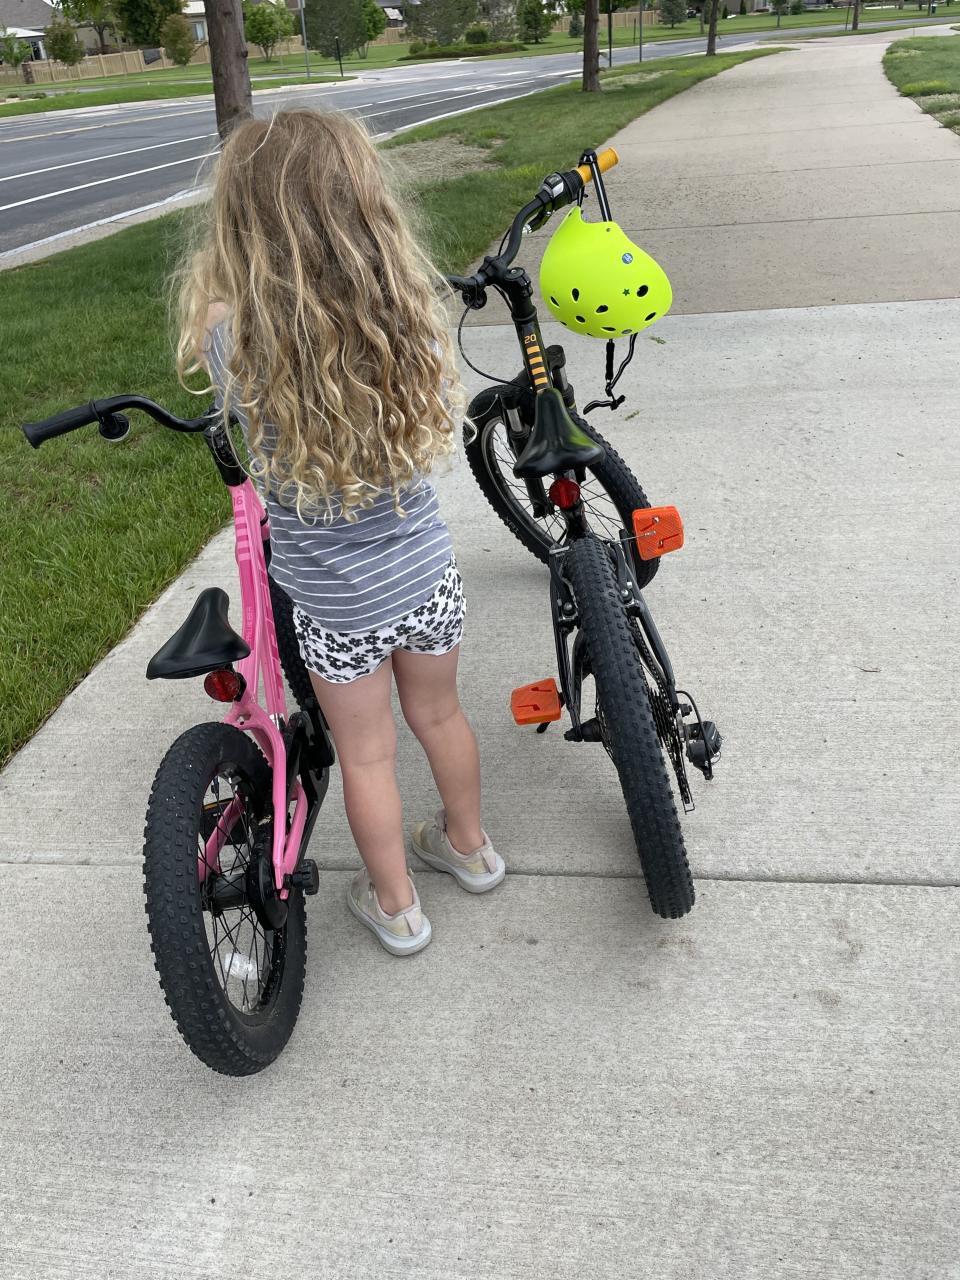 The author's daughter standing next to bikes